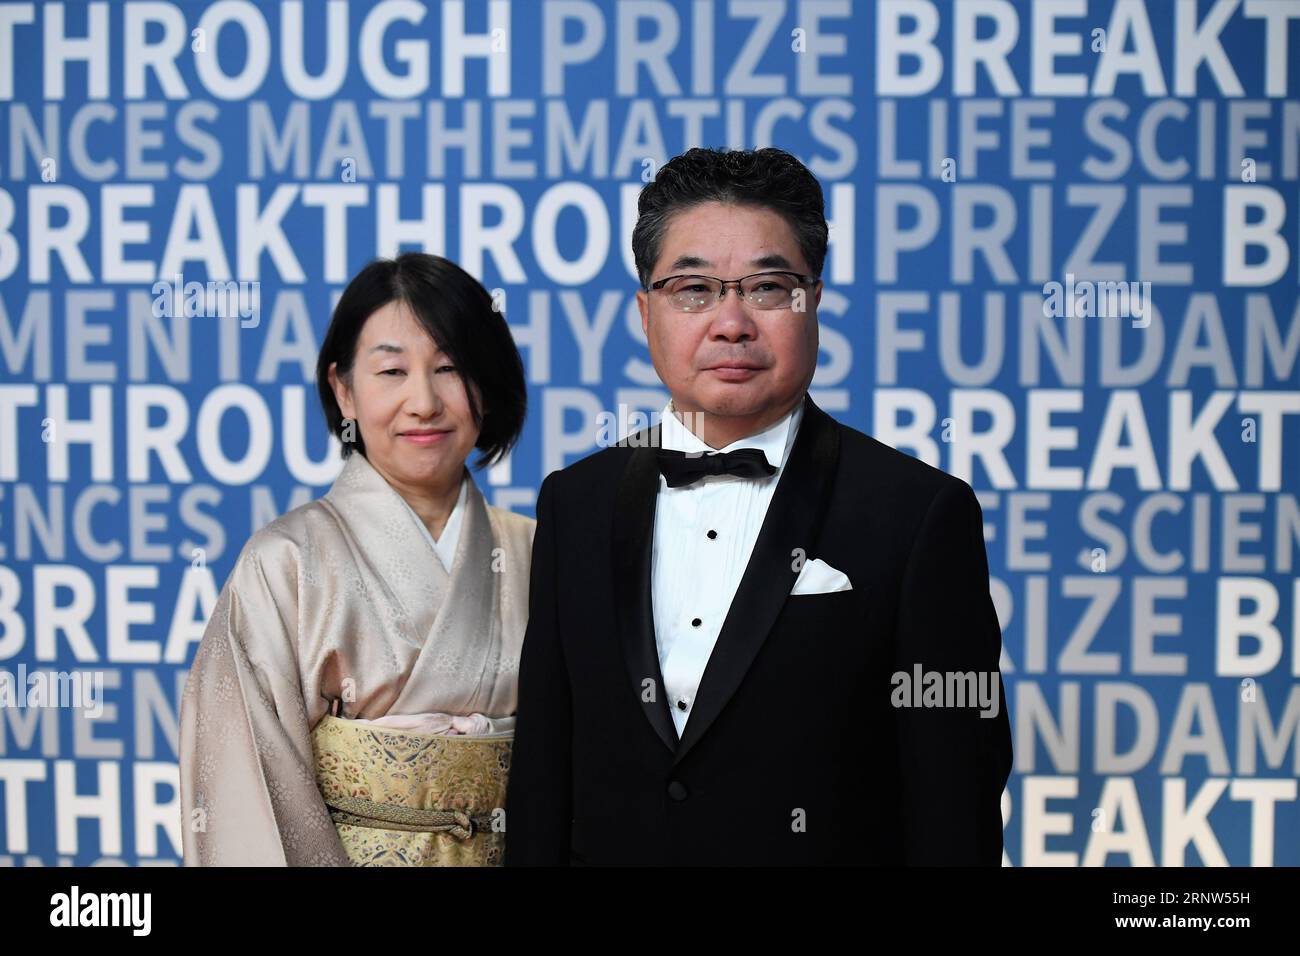 (171204) -- SAN FRANCISCO, Dec. 4, 2017 -- Kazutoshi Mori from Kyoto University (R) attends the awarding ceremony of the 2018 Breakthrough Prize in San Francisco, the United States, on Dec. 3, 2017. The Breakthrough Prize Foundation on Sunday announced here the winners of the 2018 Breakthrough Prizes in fundamental physics, life sciences and mathematics, together with several other prizes to encourage young scientists. The prize in life sciences went to Joanne Chory from the Salk Institute for Biological Studies and Howard Hughes Medical Institute, Don W. Cleveland from the Ludwig Institute fo Stock Photo